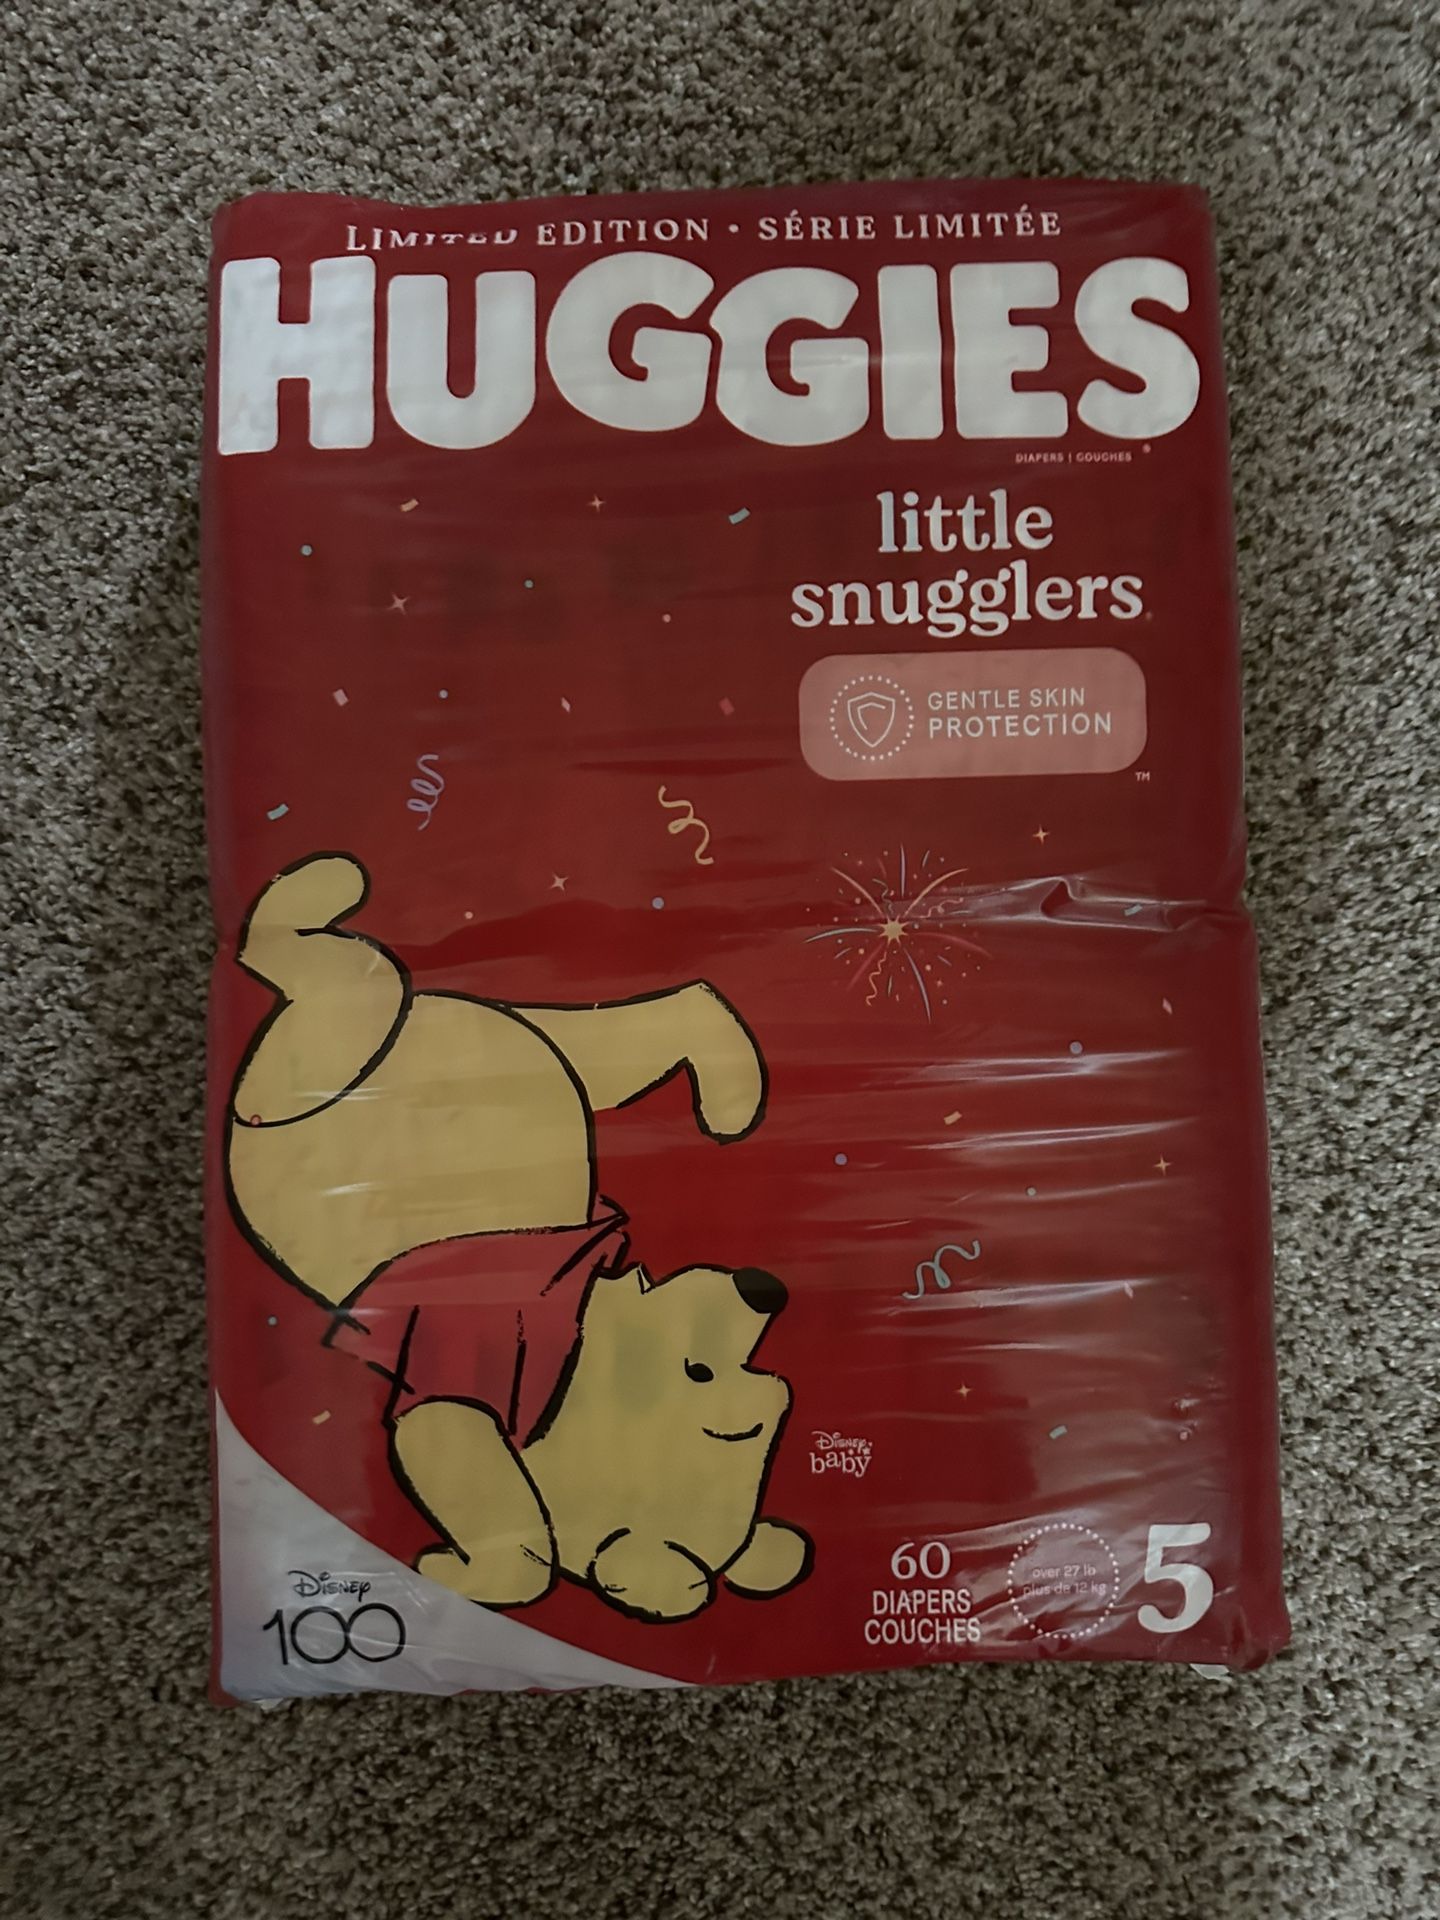 Huggies Little Snugglers Size 5 60 Diapers